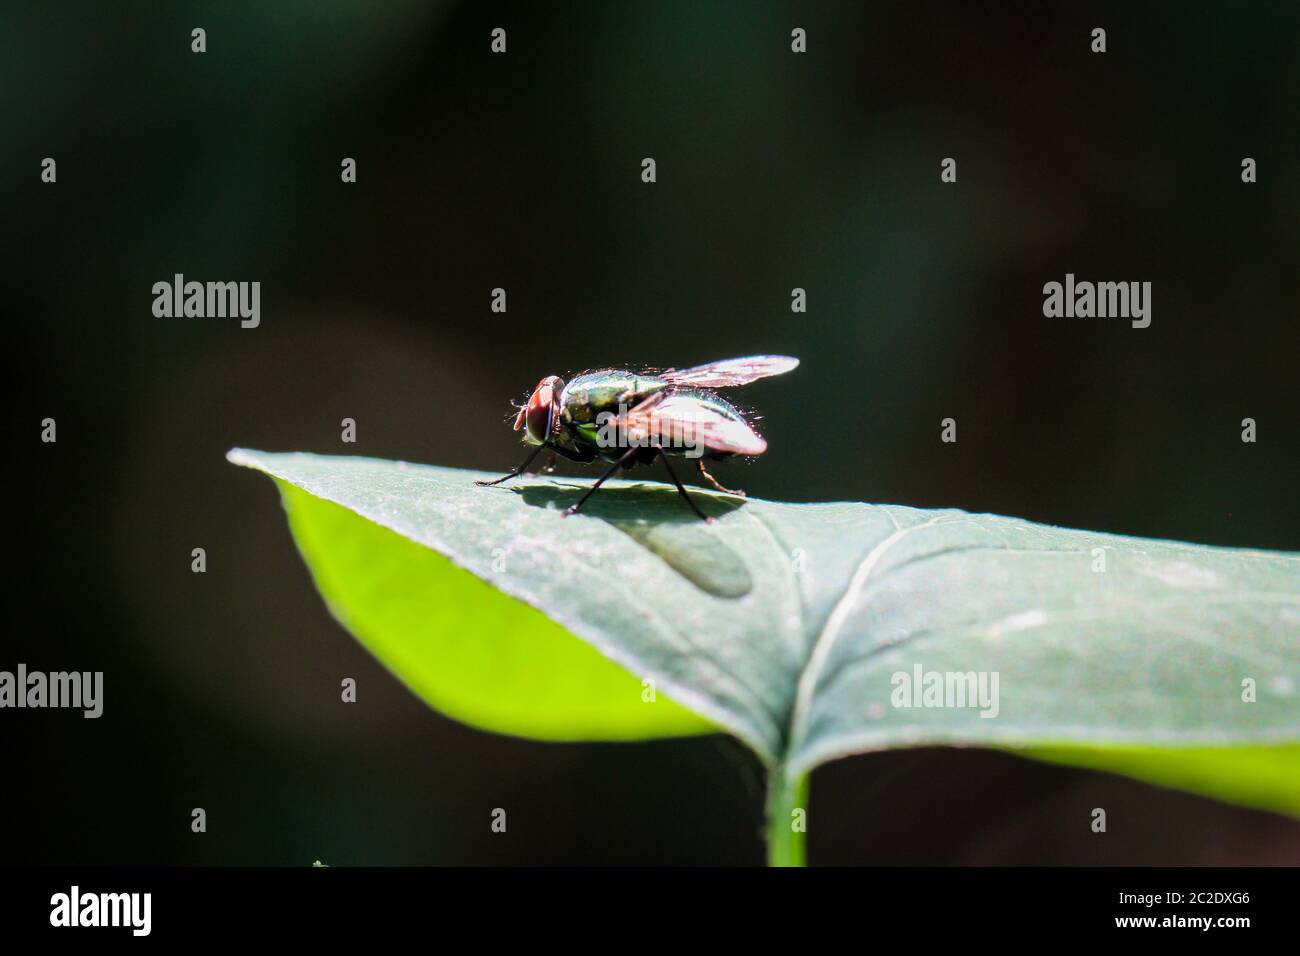 Details of a Fly, Macro of a fly Stock Photo